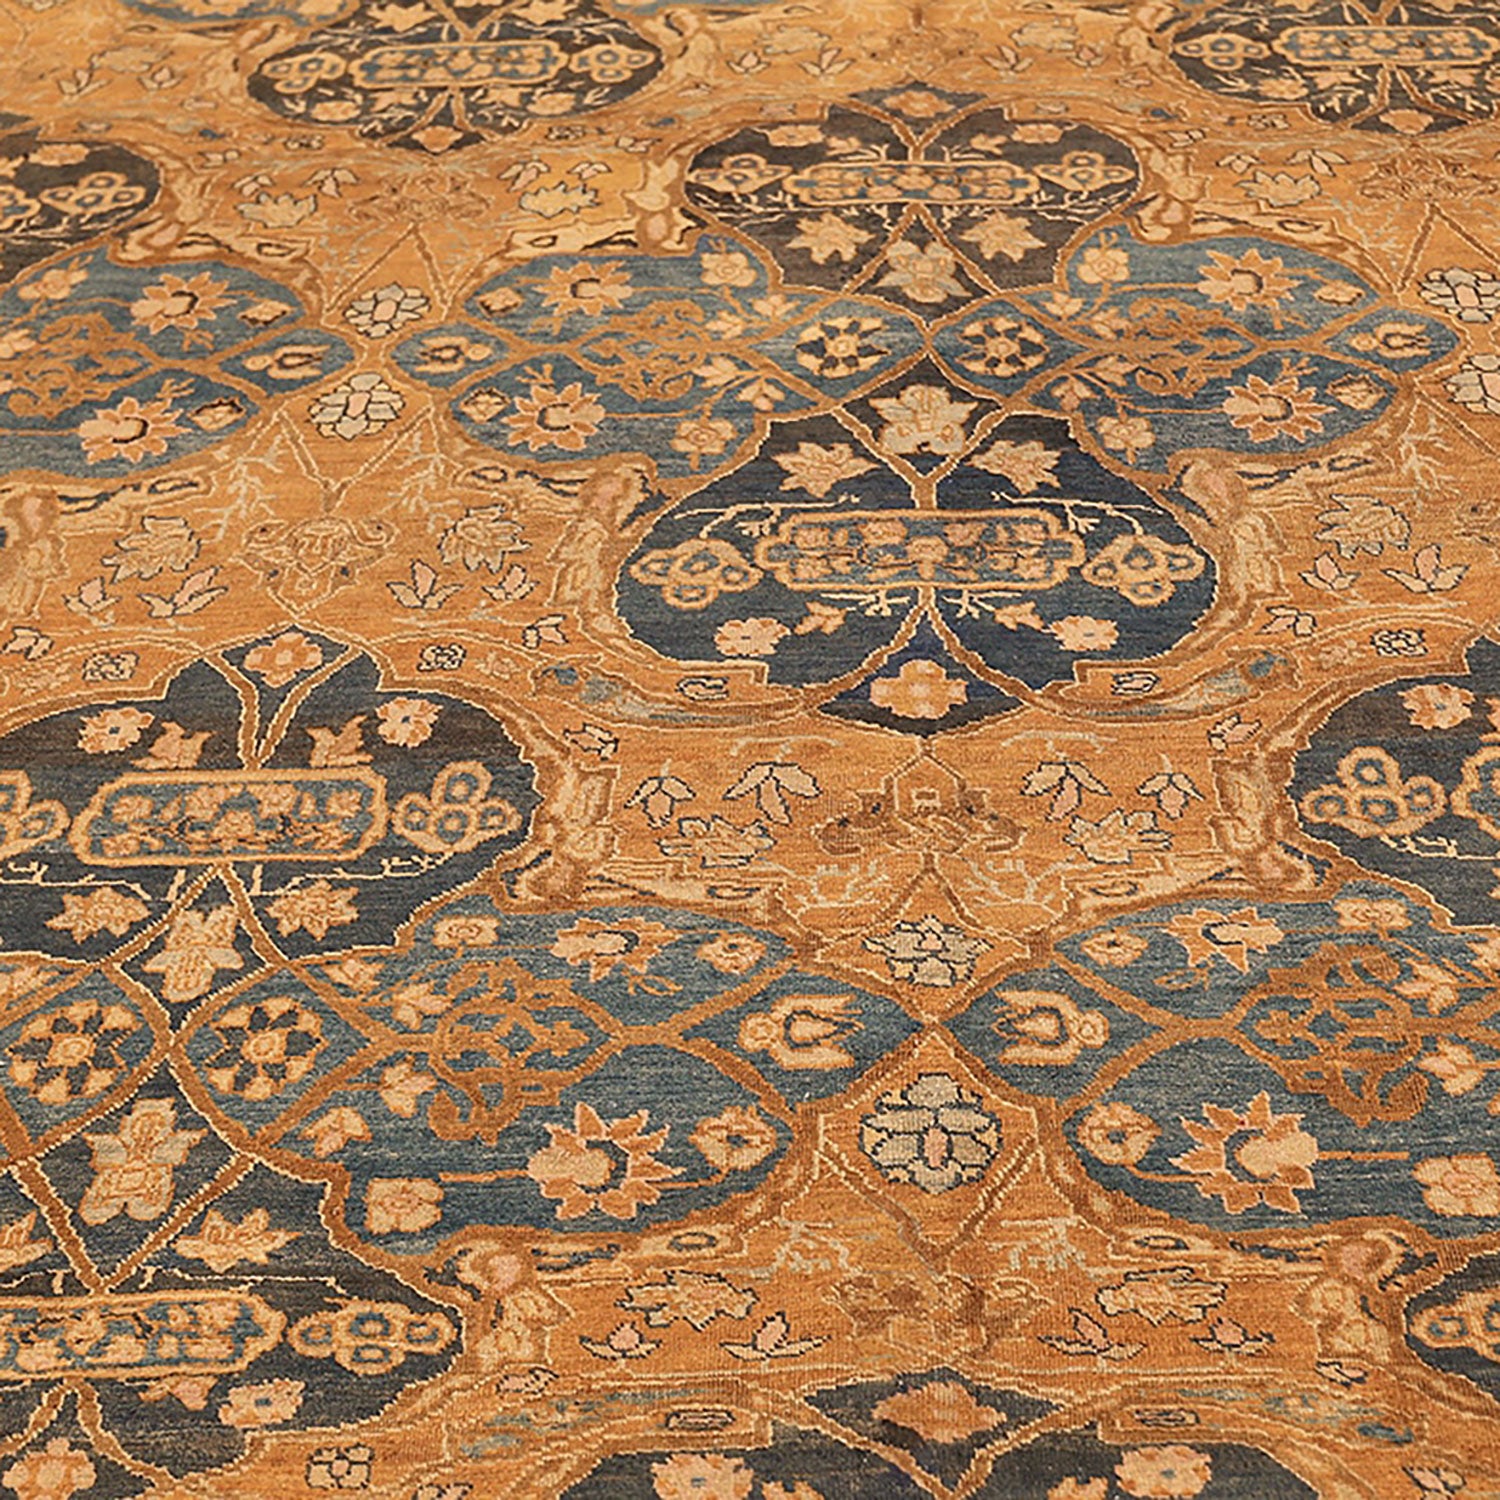 Close-up of a richly patterned carpet with floral and geometric motifs.